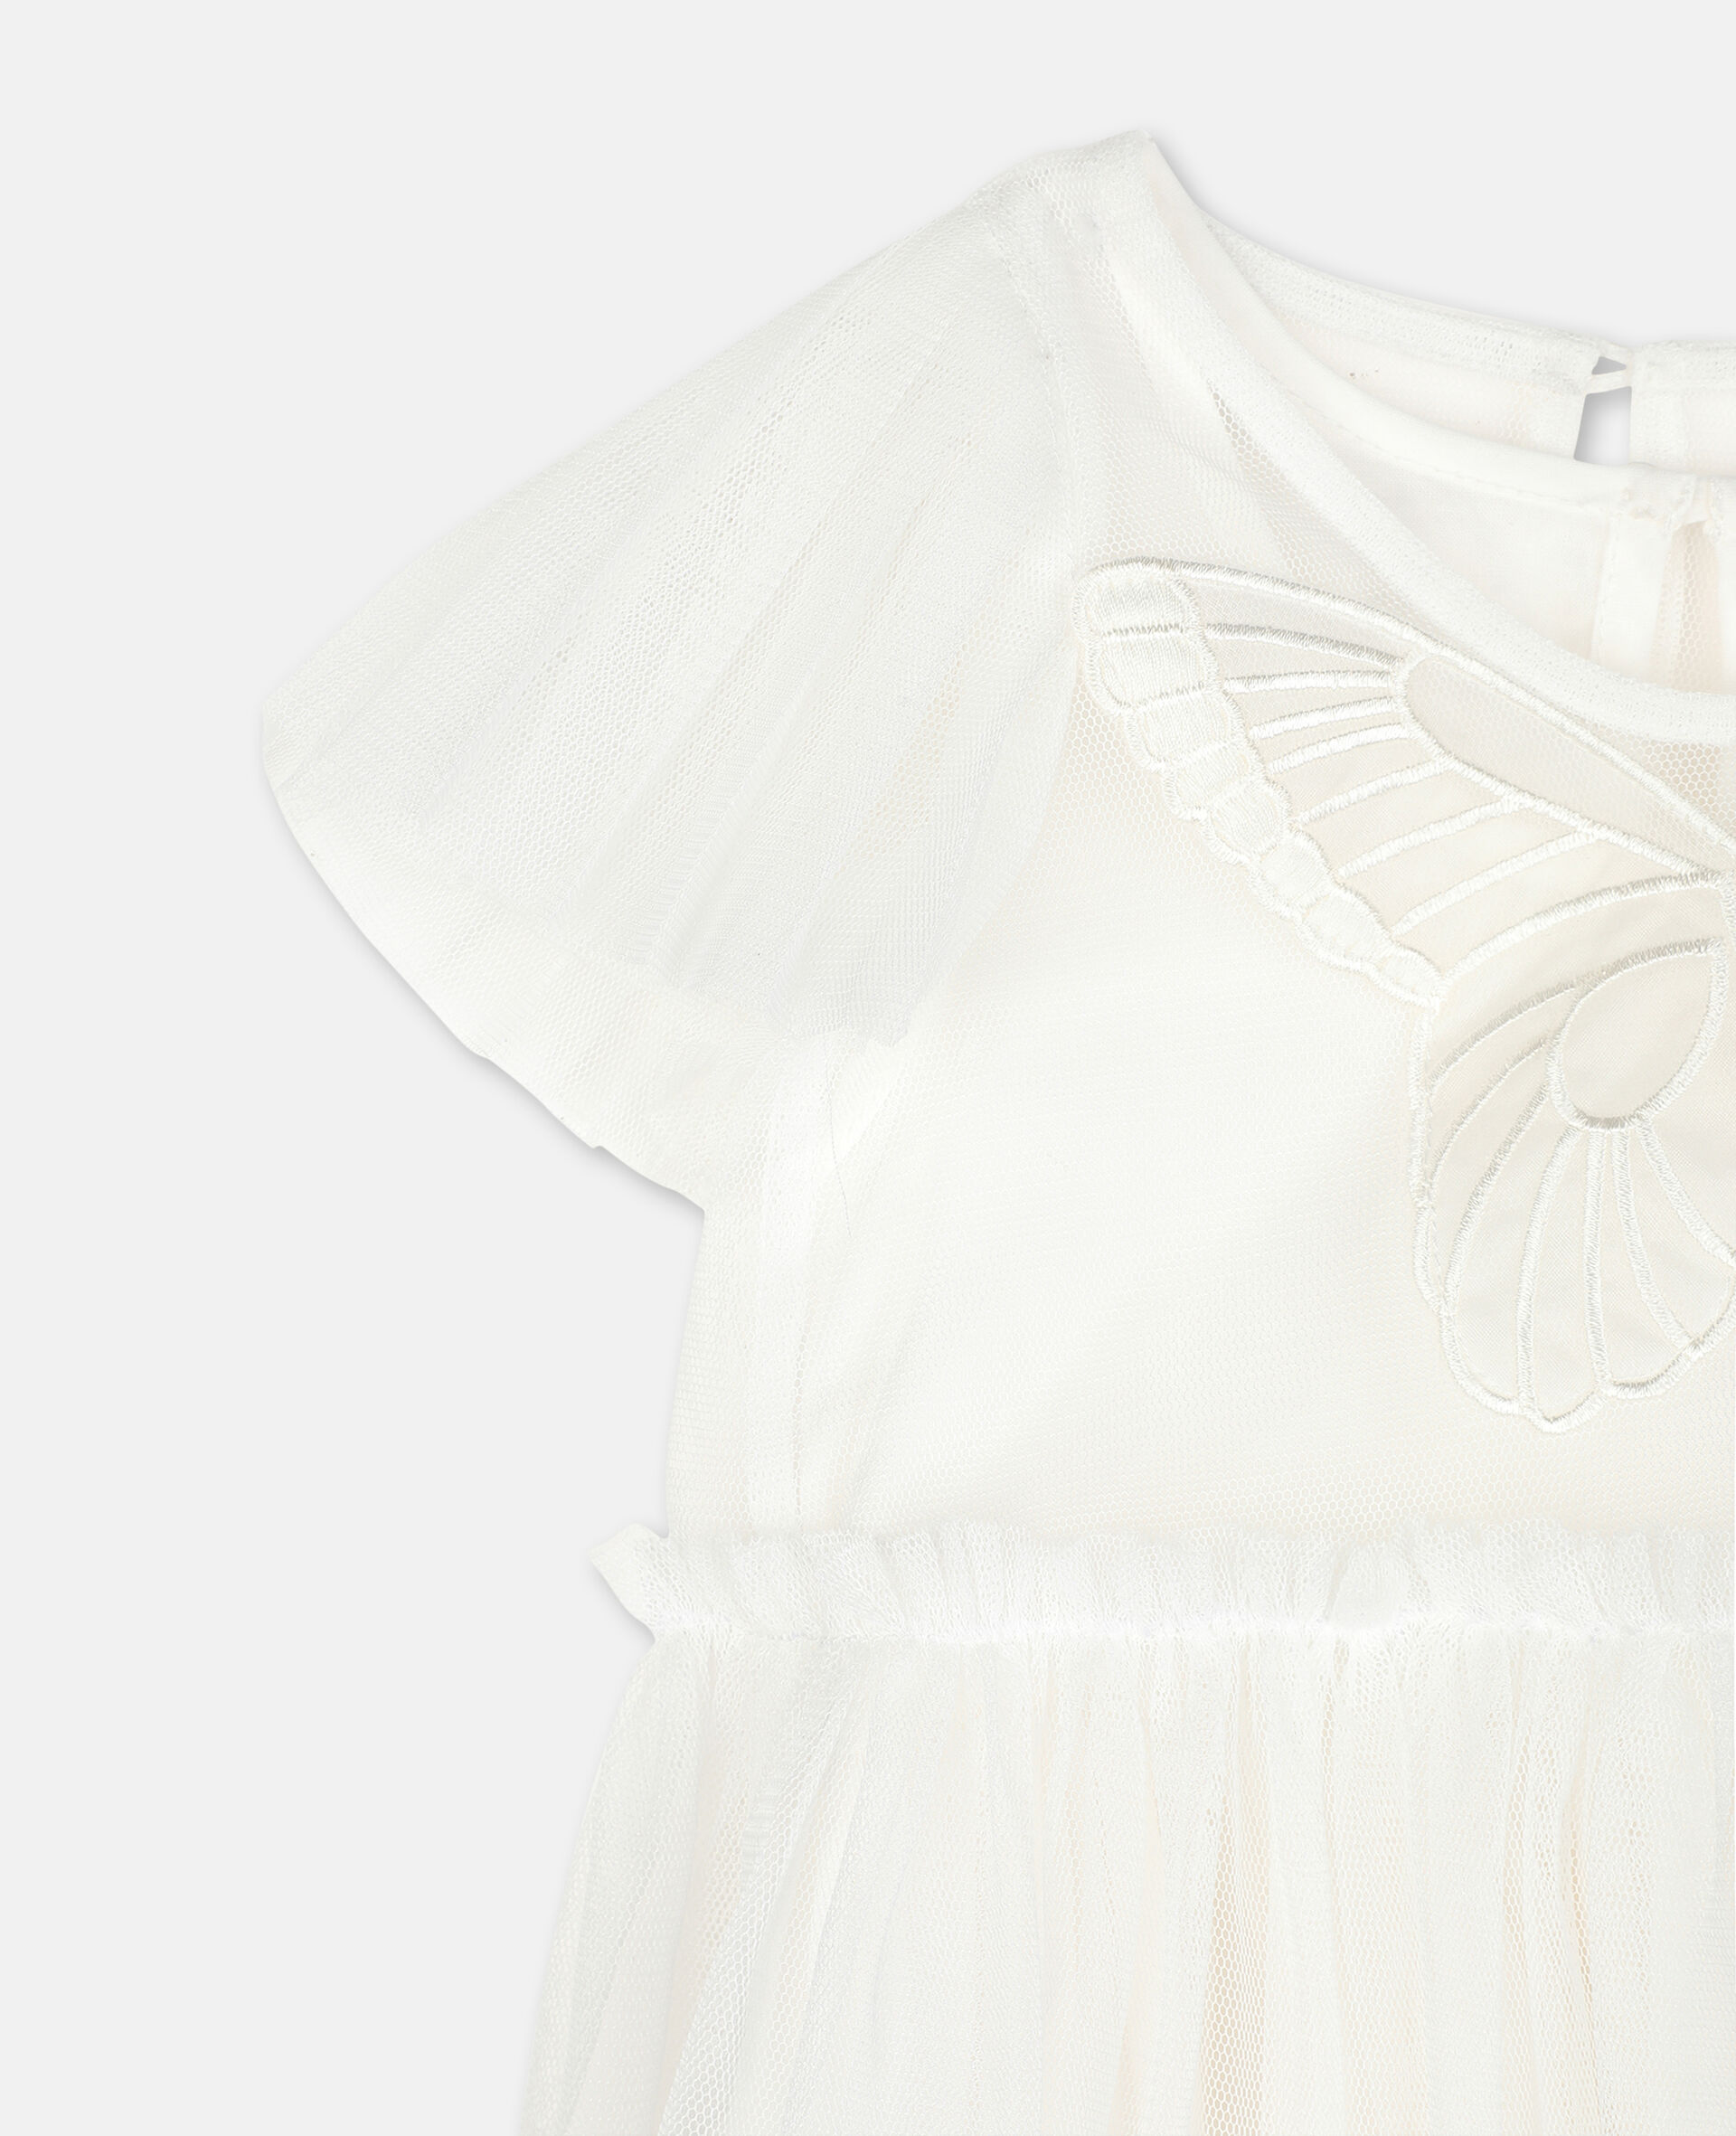 Butterfly Patch Tulle Dress -White-large image number 2